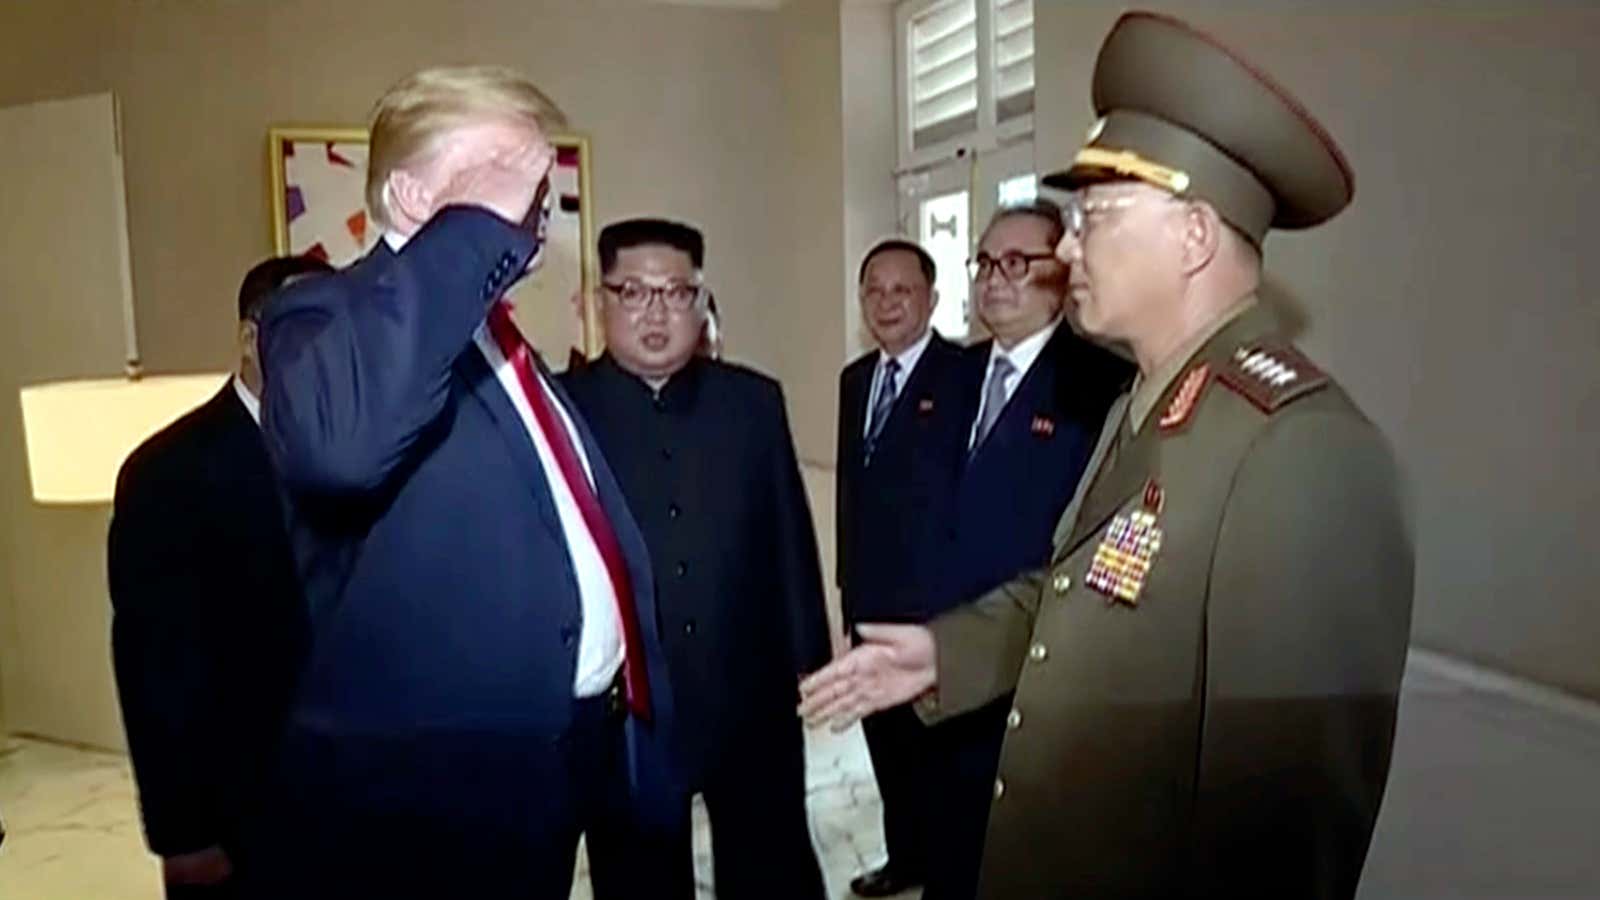 Donald Trump salutes a North Korean general during the Singapore summit.